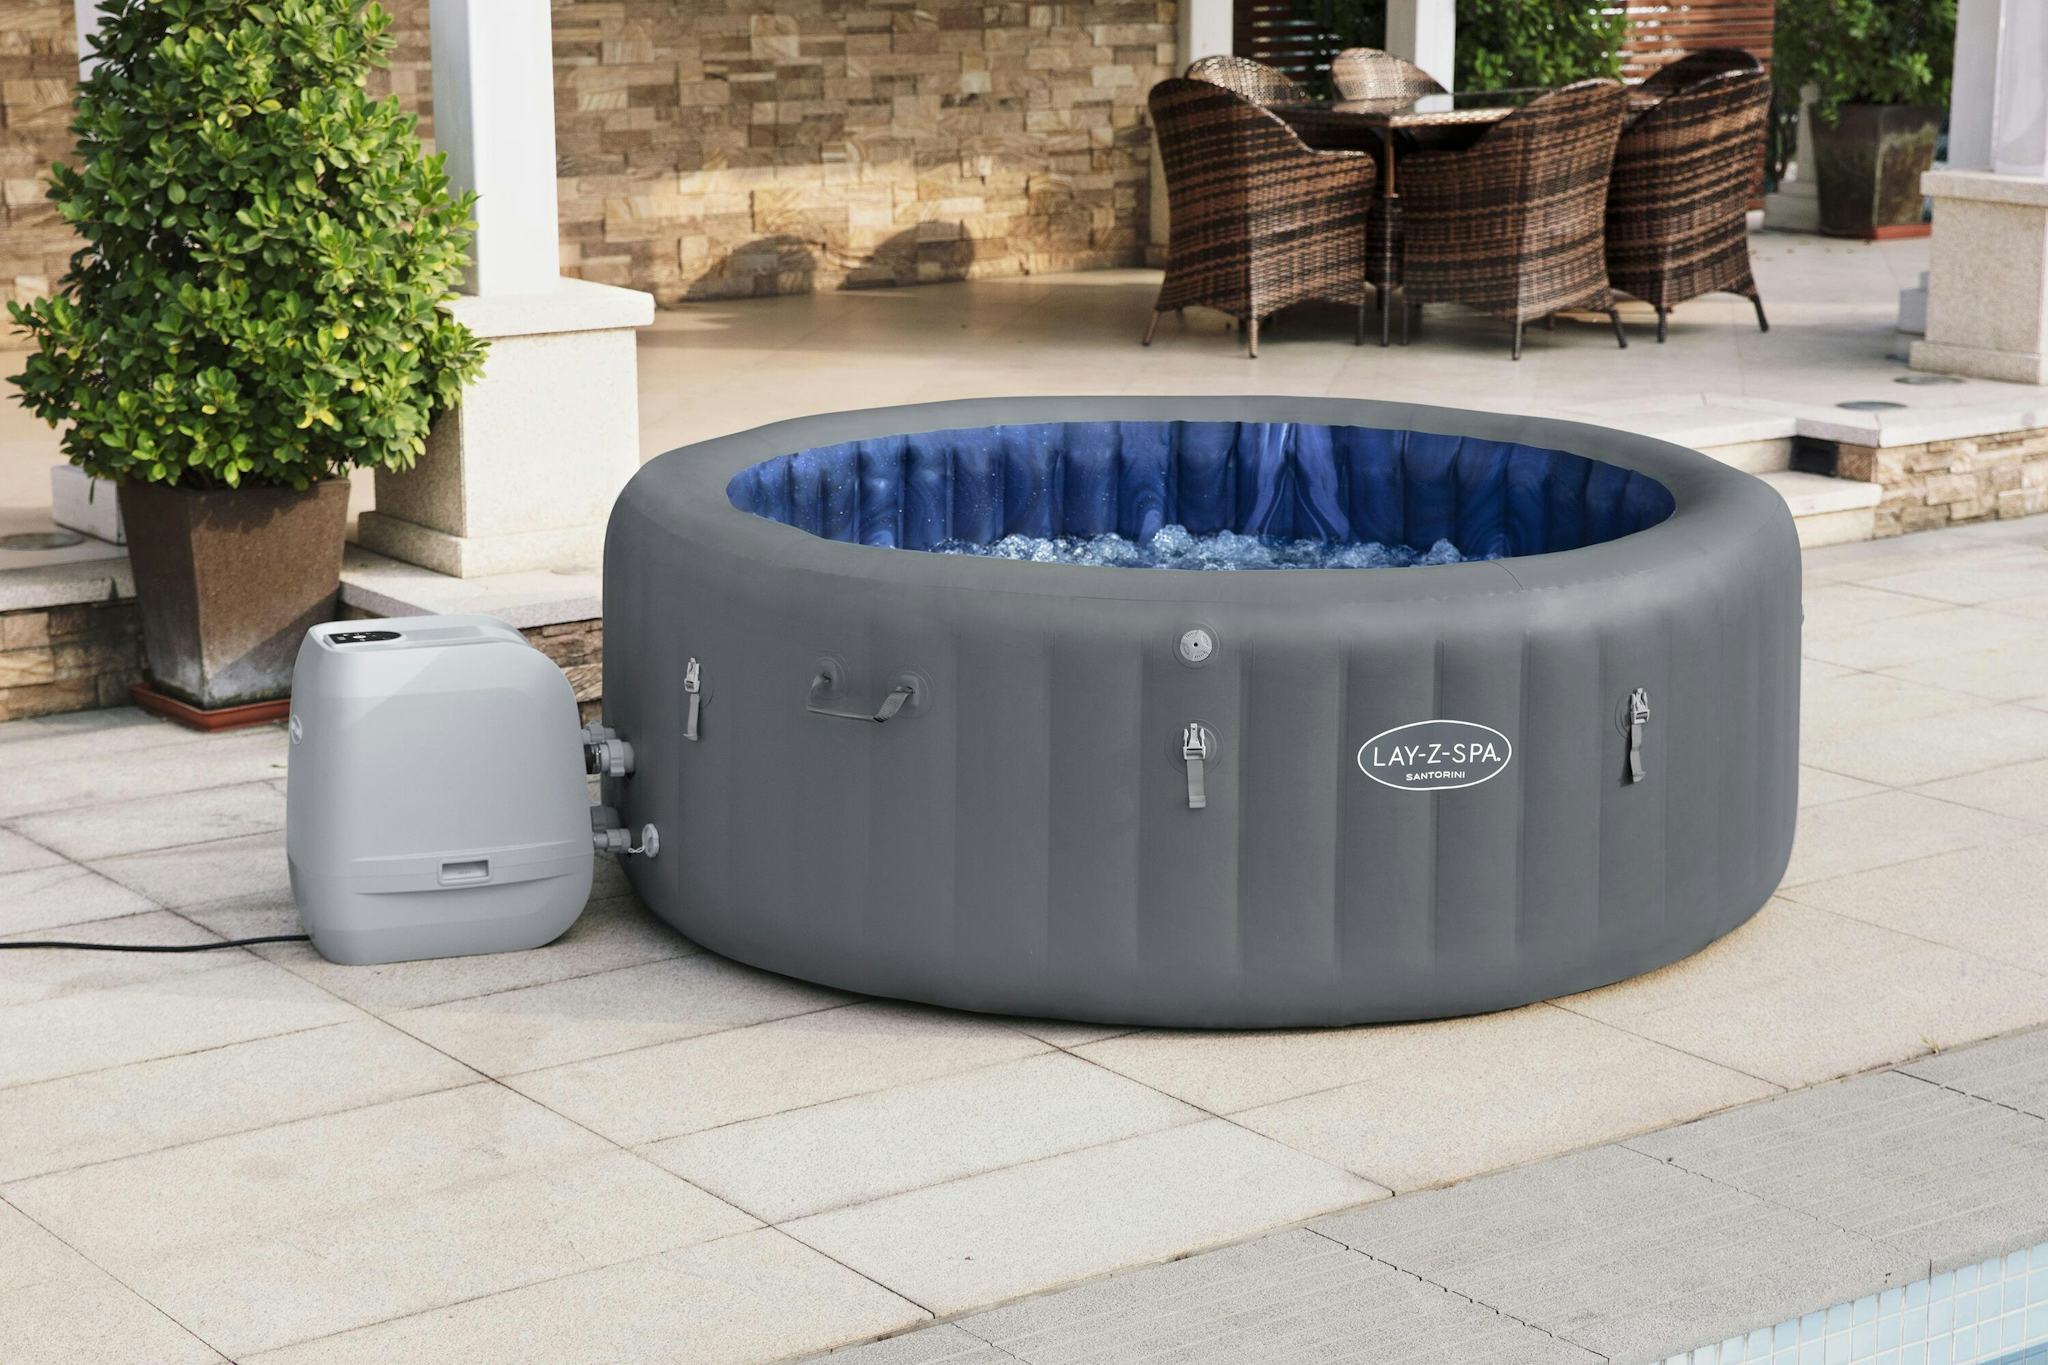 Spas Gonflables Spa gonflable rond Lay-Z-Spa Santorini Hydrojet pro™ 5 - 7 personnes Wifi Bestway 15